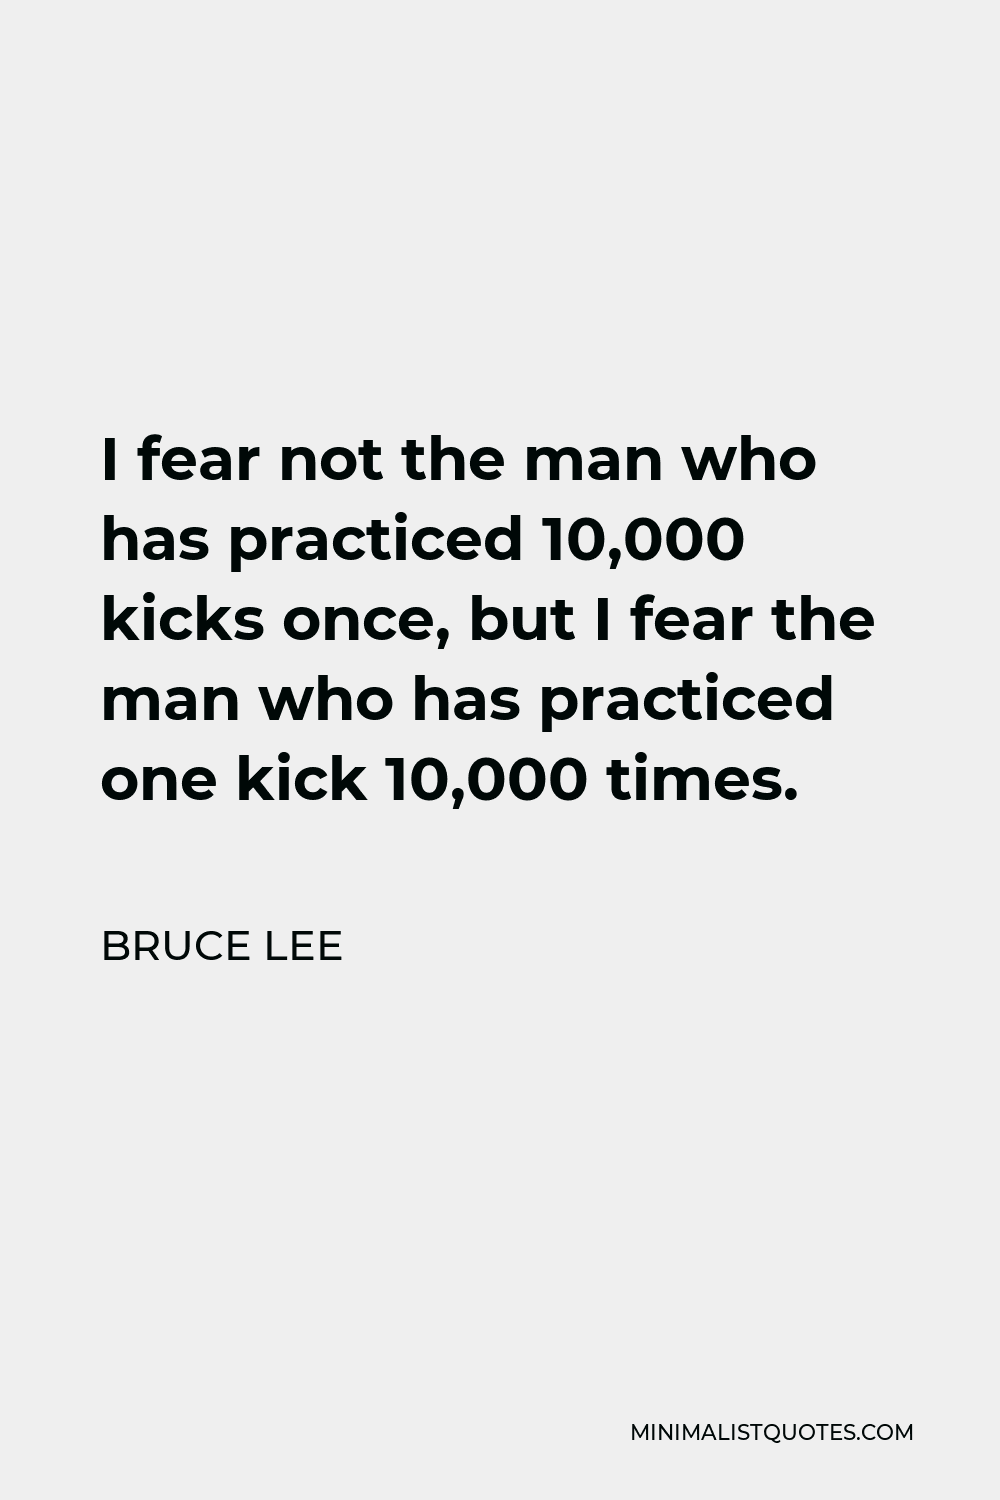 Bruce Lee Quote - I fear not the man who has practiced 10,000 kicks once, but I fear the man who has practiced one kick 10,000 times.